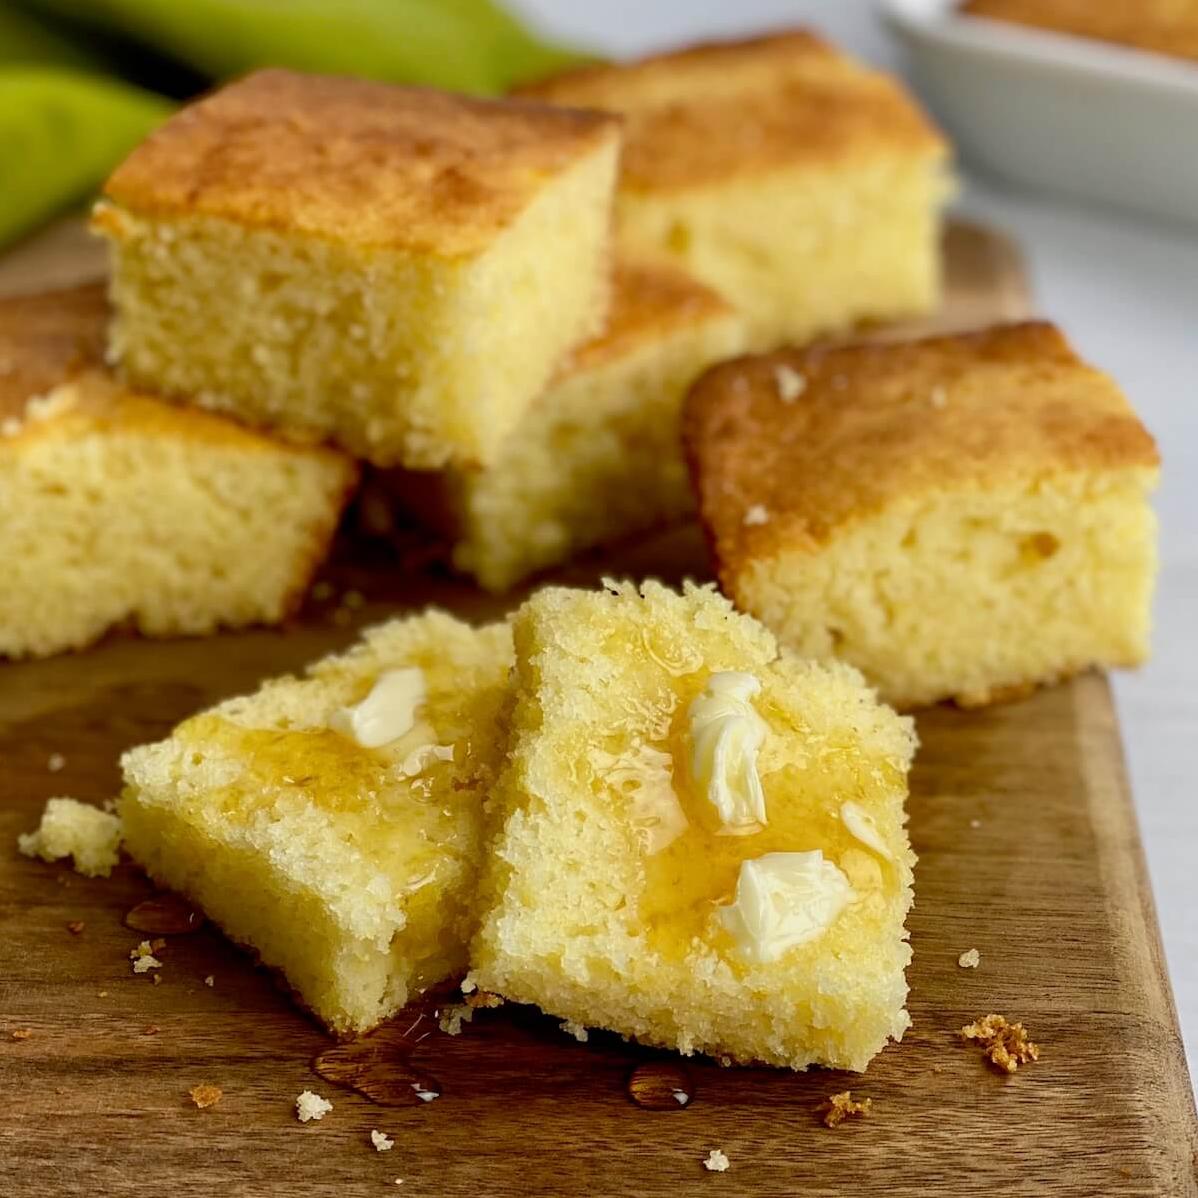  Let the aroma of freshly baked cornbread fill your home.